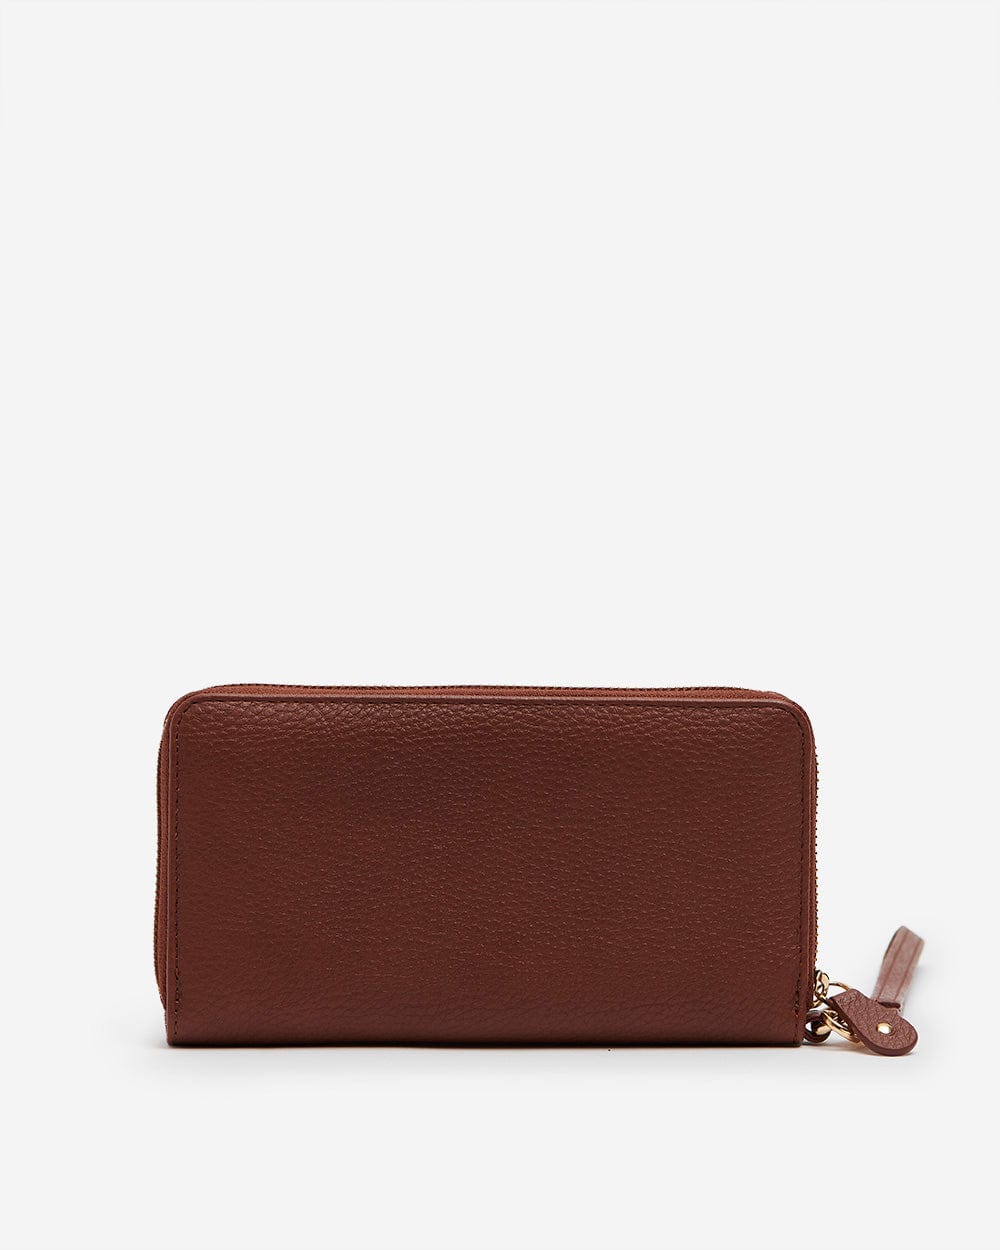 Swan Song Embroidered Wallet - Chumbak